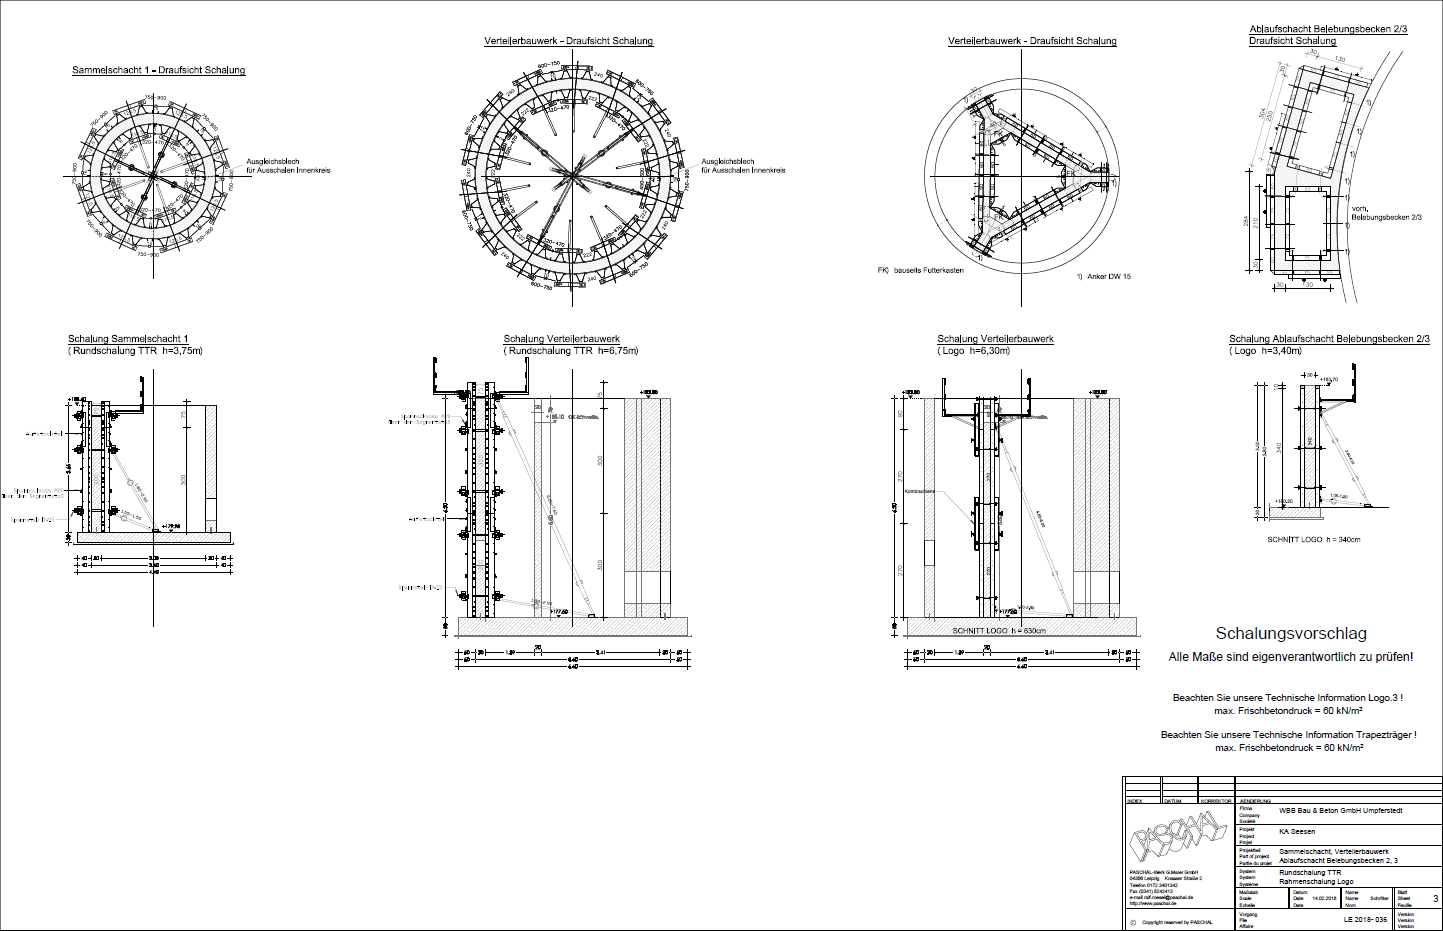 formwork planning with TTR and LOGO.3